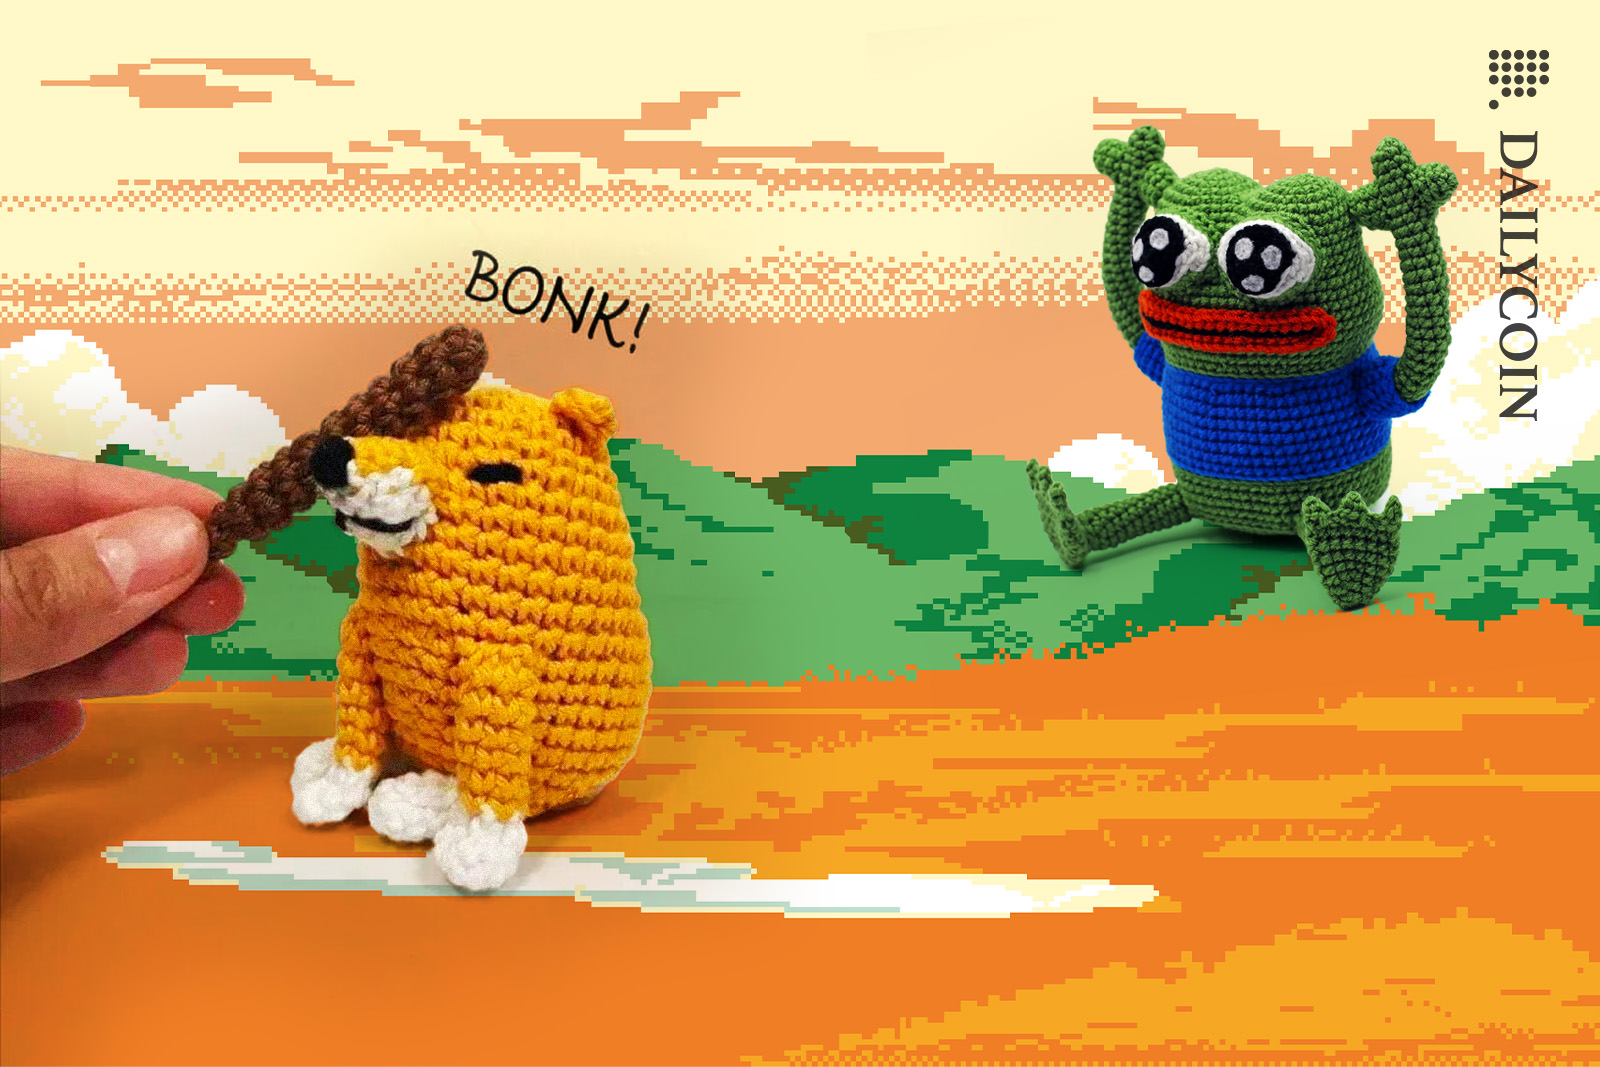 Person is playing with BONK! and pepe is watching them in the distance.